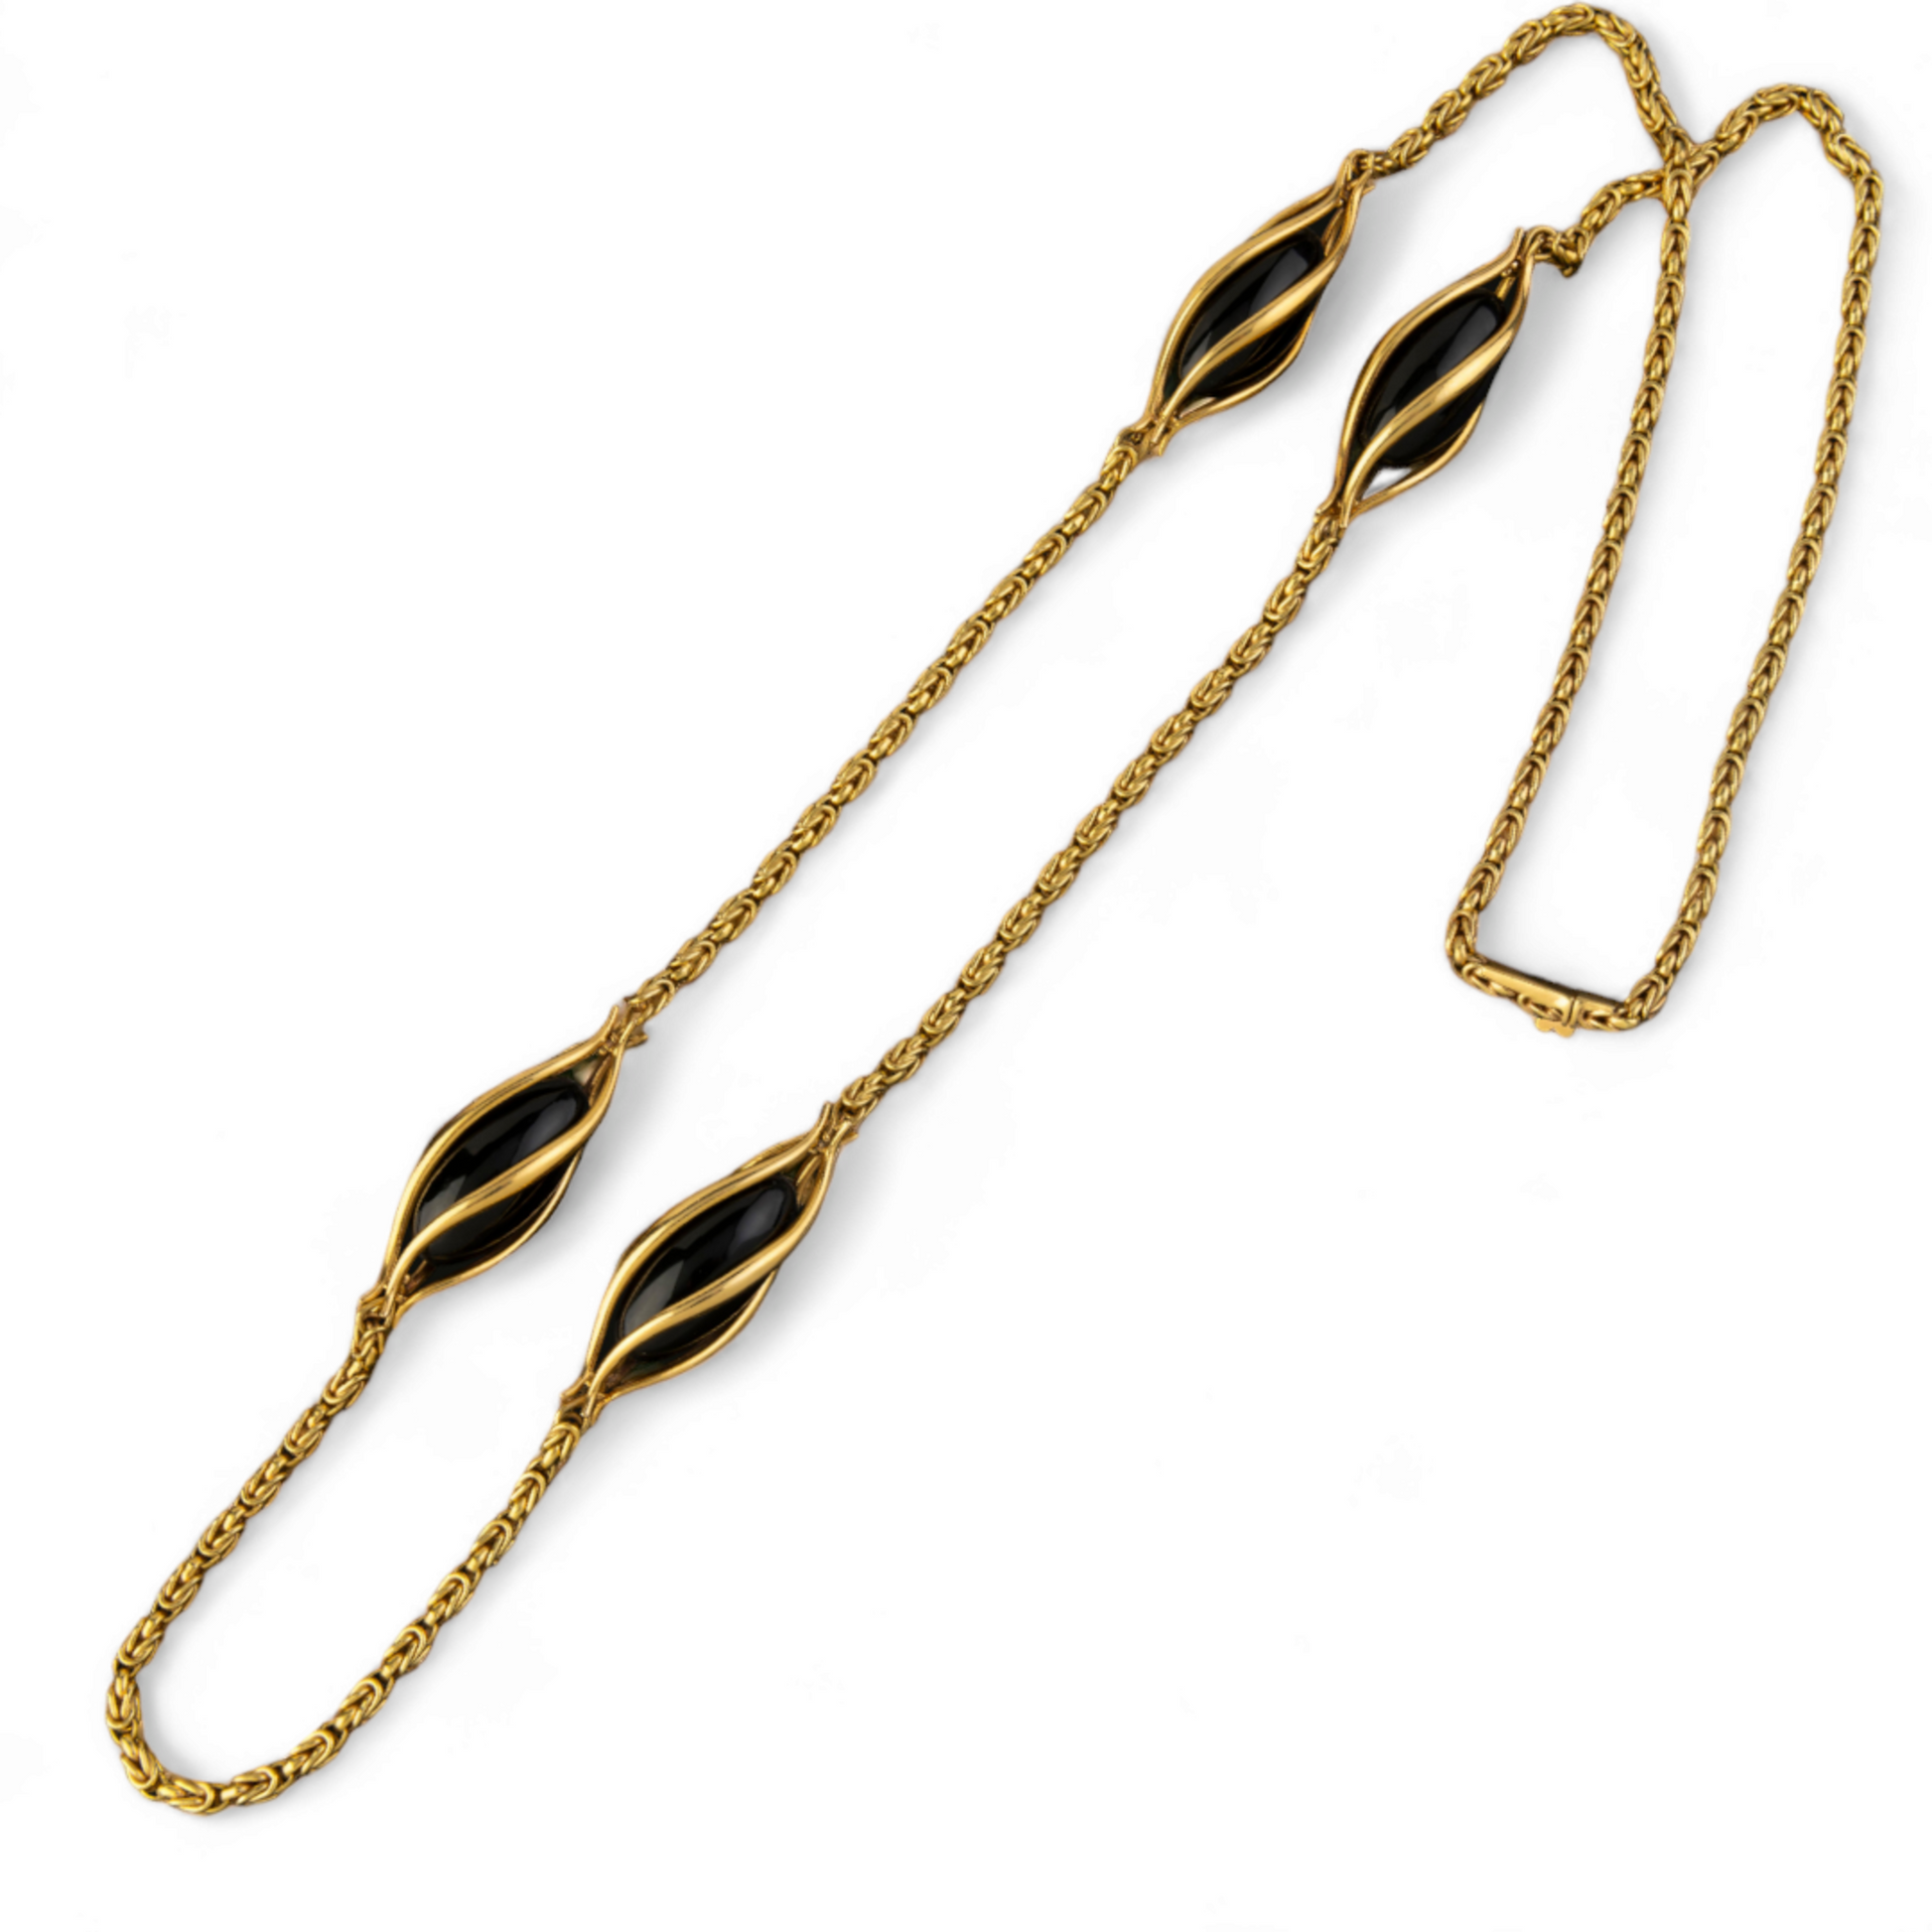 Bucherer 1970s 18KT Yellow Gold Onyx Byzantine Link Chain Necklace front